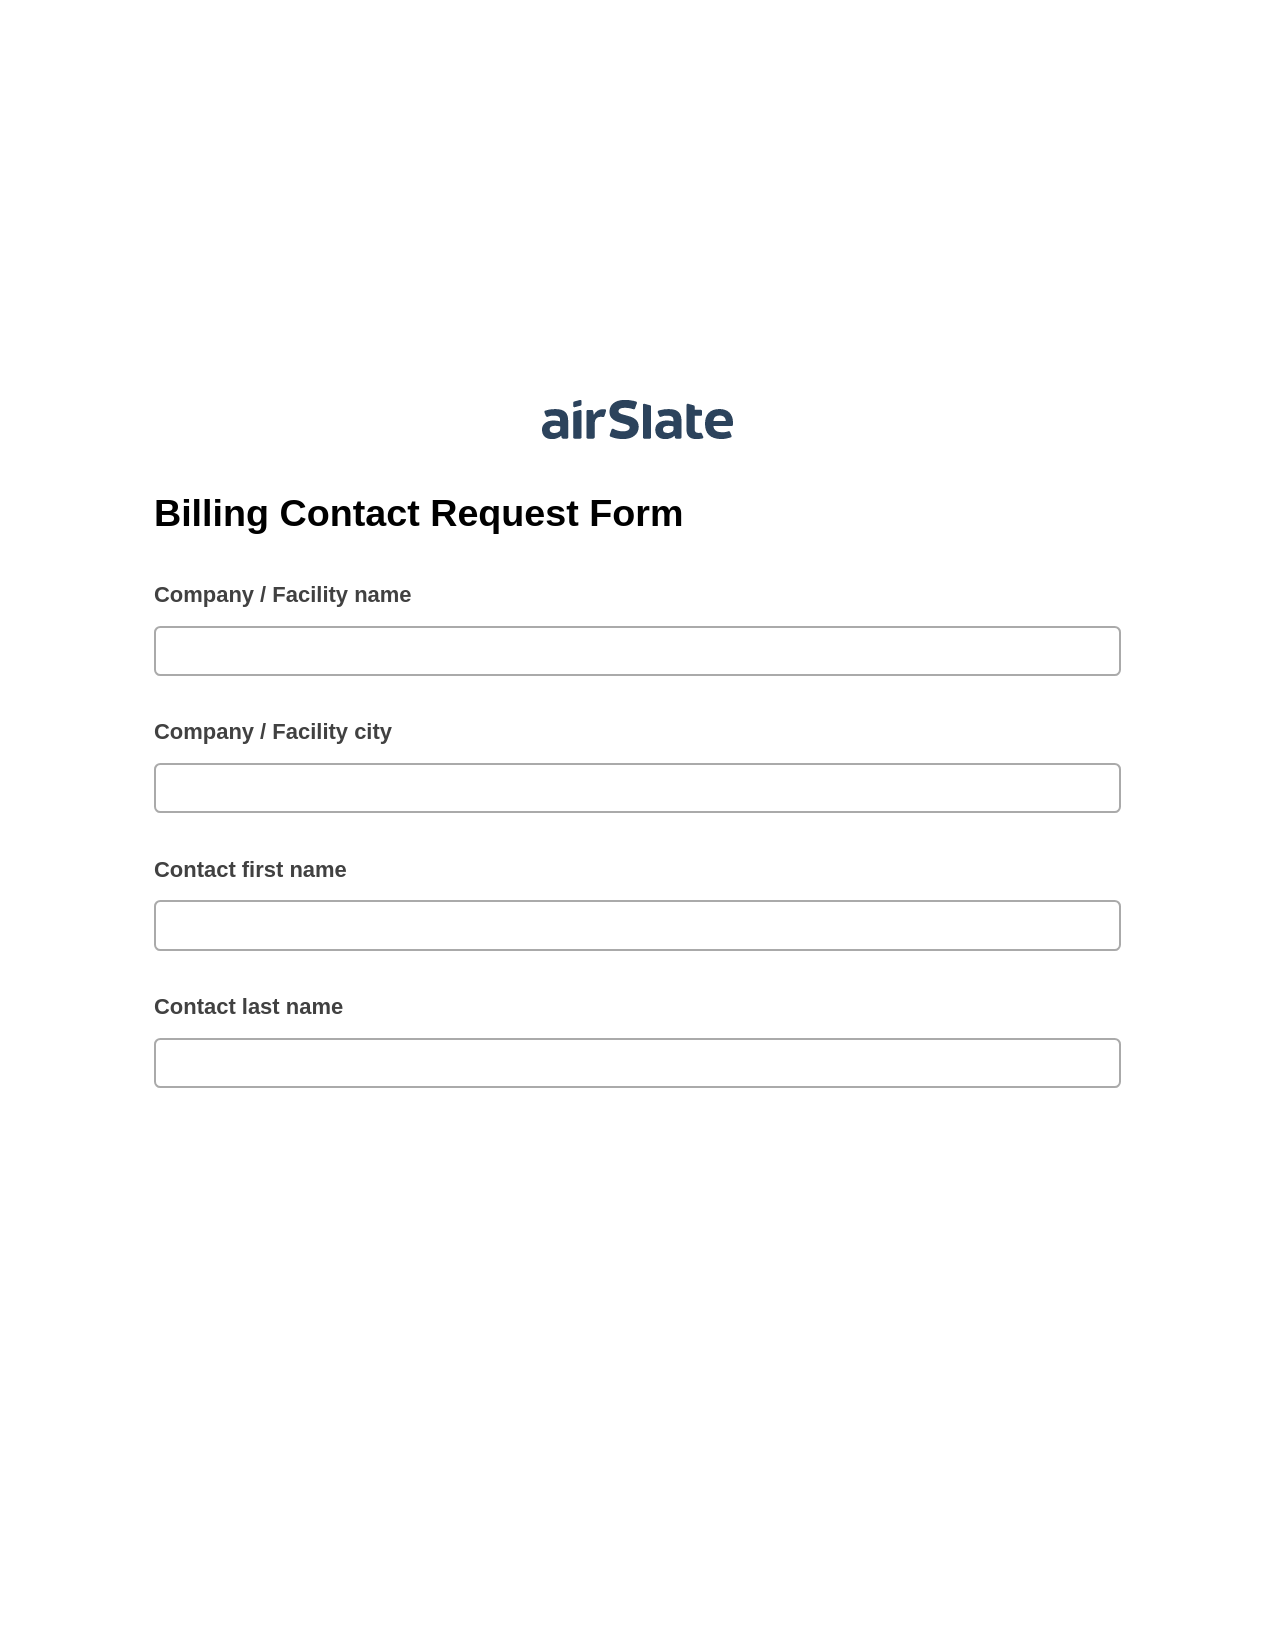 Multirole Billing Contact Request Form Pre-fill from Salesforce Records with SOQL Bot, SendGrid send Campaign bot, Dropbox Bot